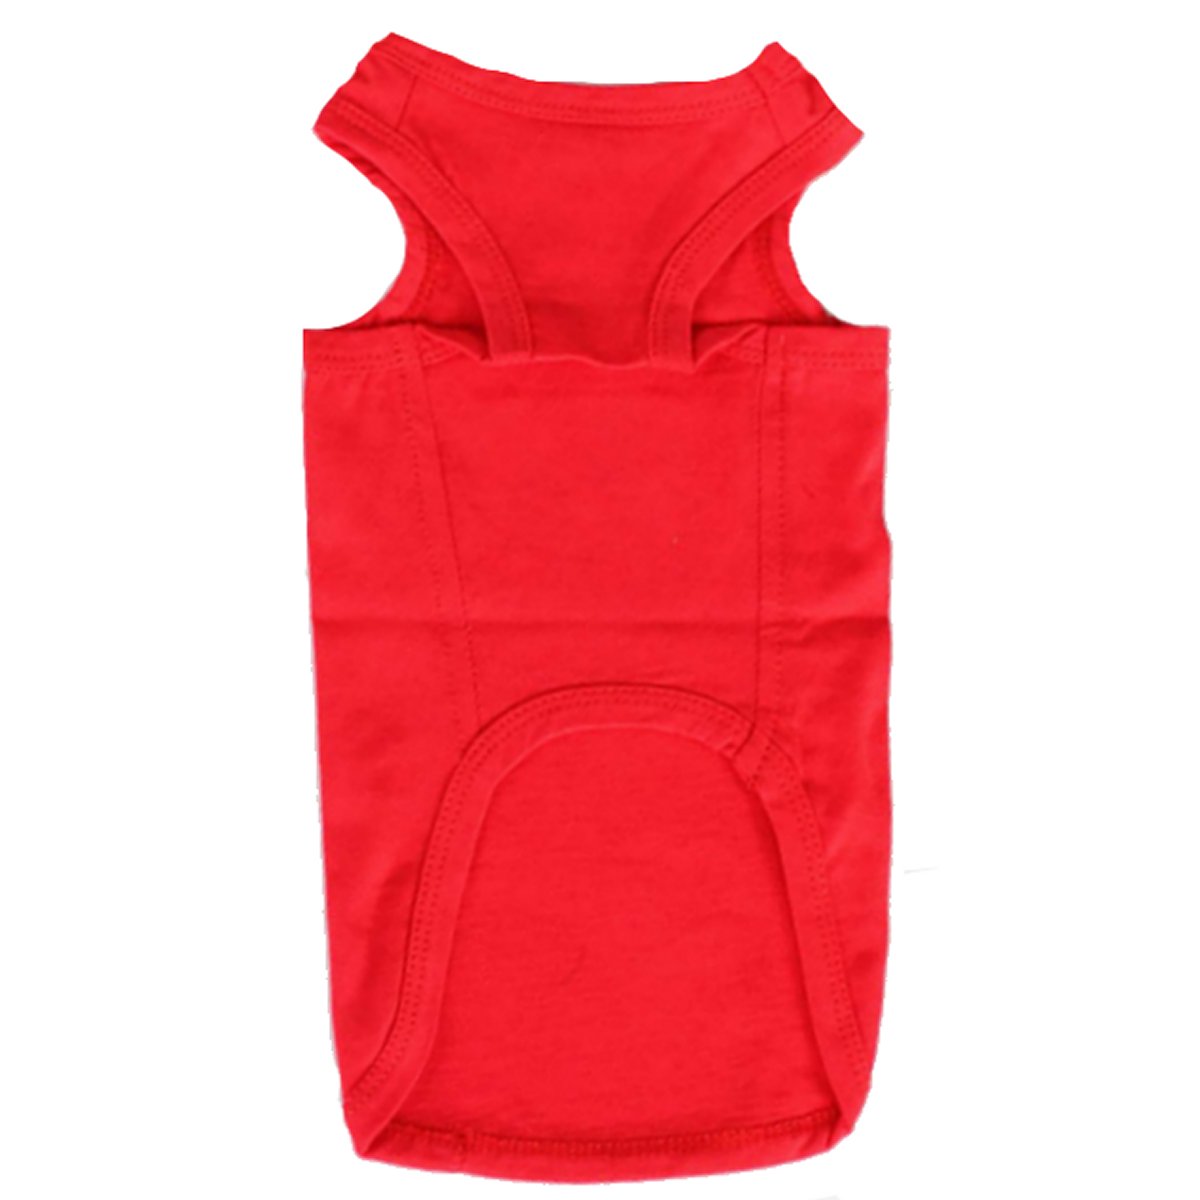 Cat Vest Top - Red - Clothes for Cats